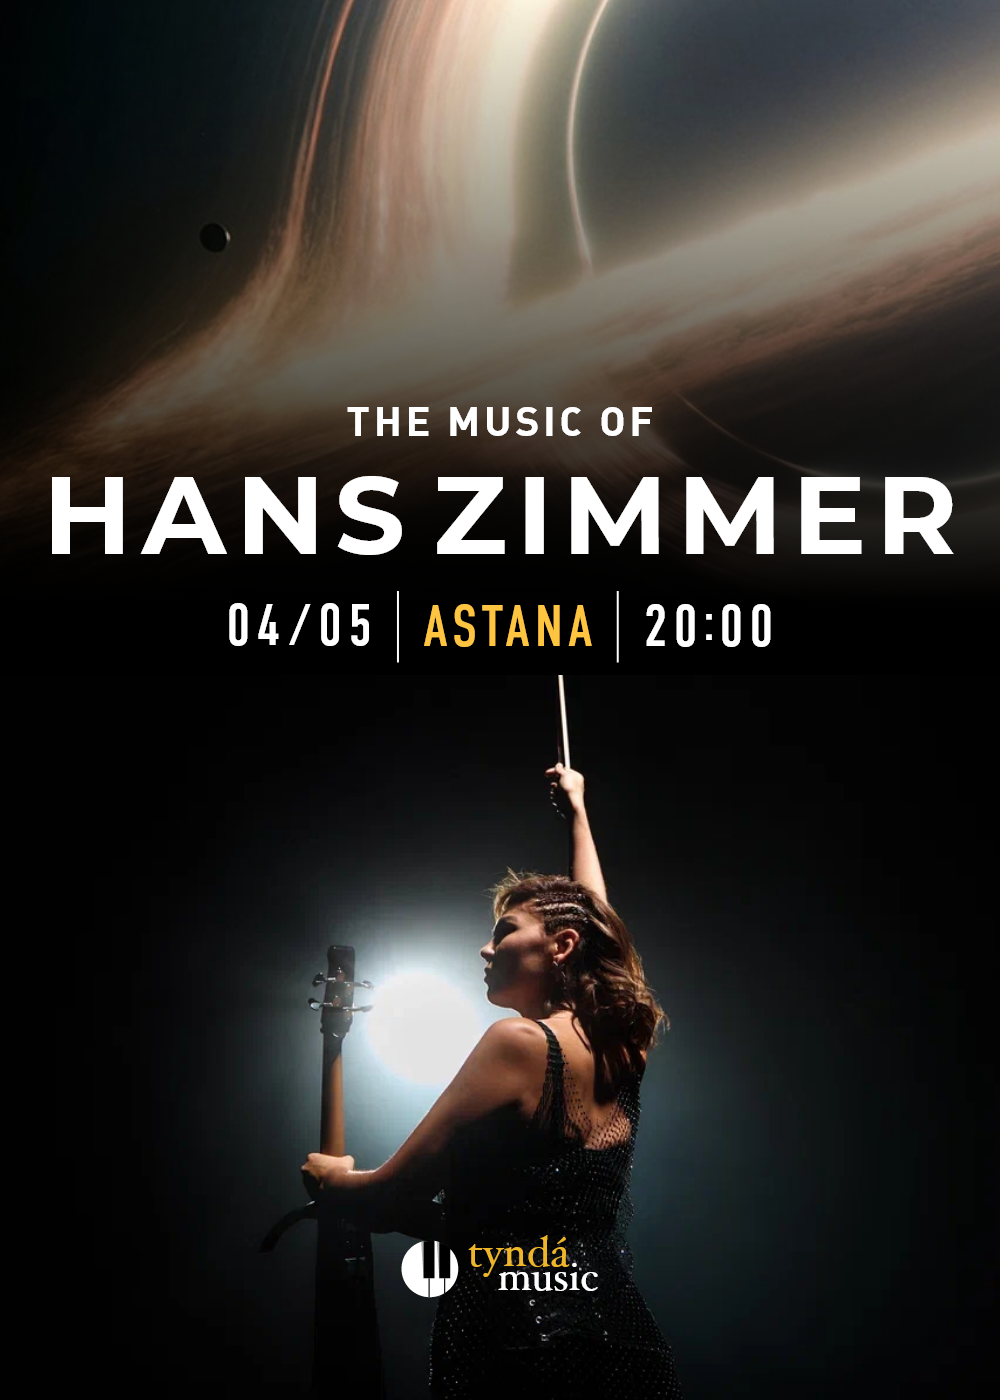 The World of Hans Zimmer in Astana